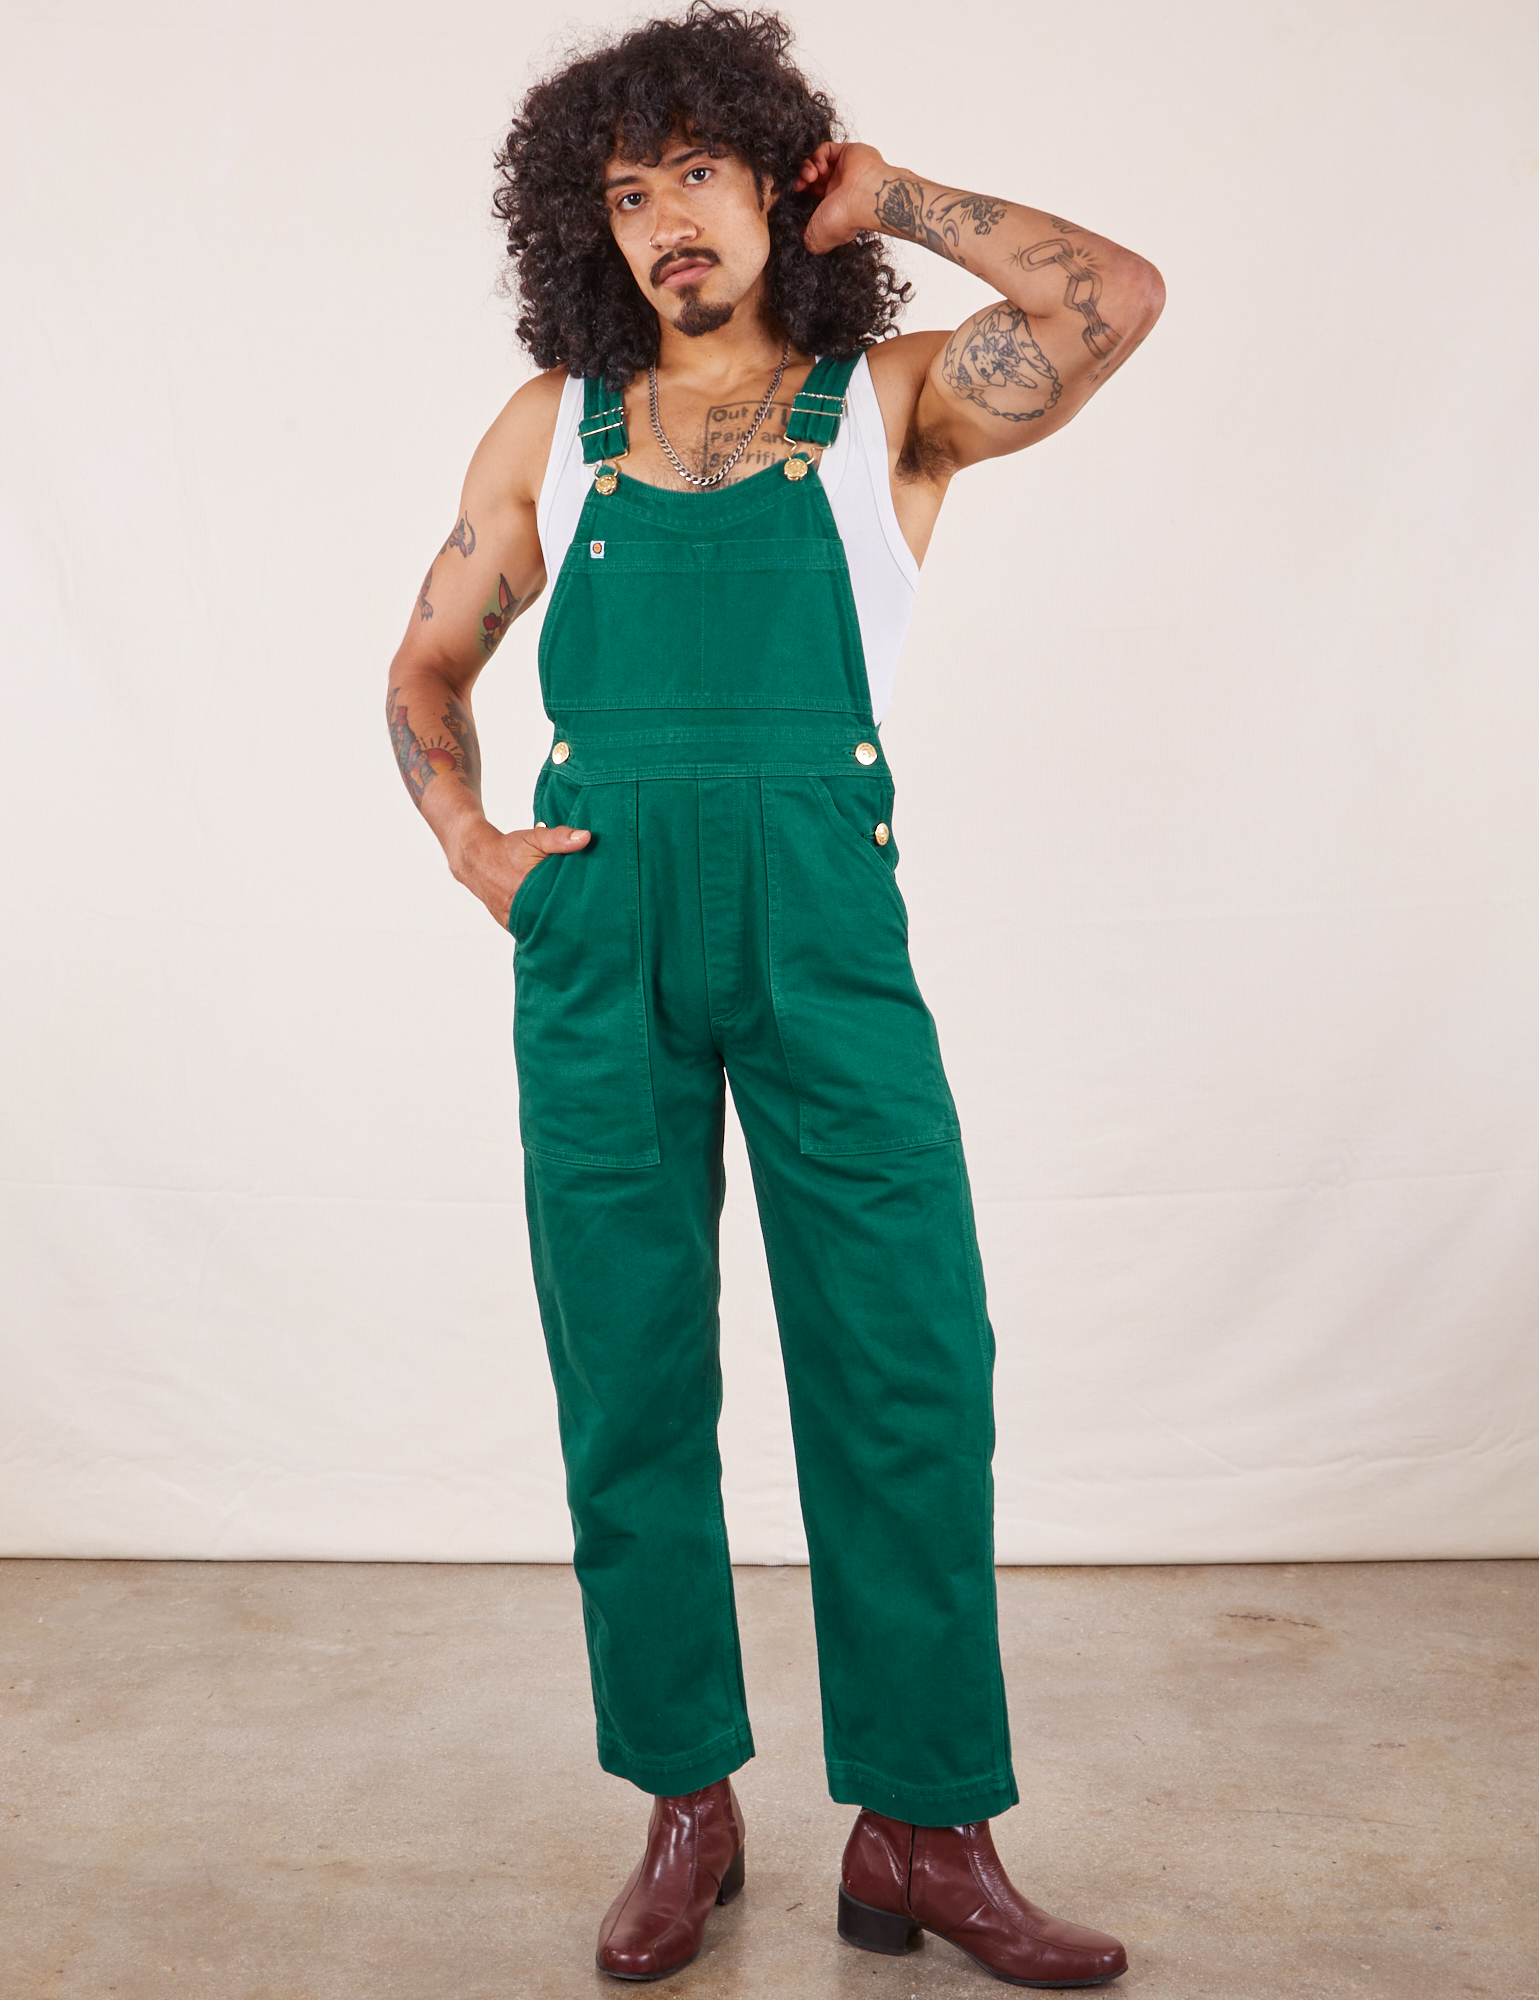 Jesse is 5&#39;8&quot; and wearing XXS Original Overalls in Mono Hunter Green